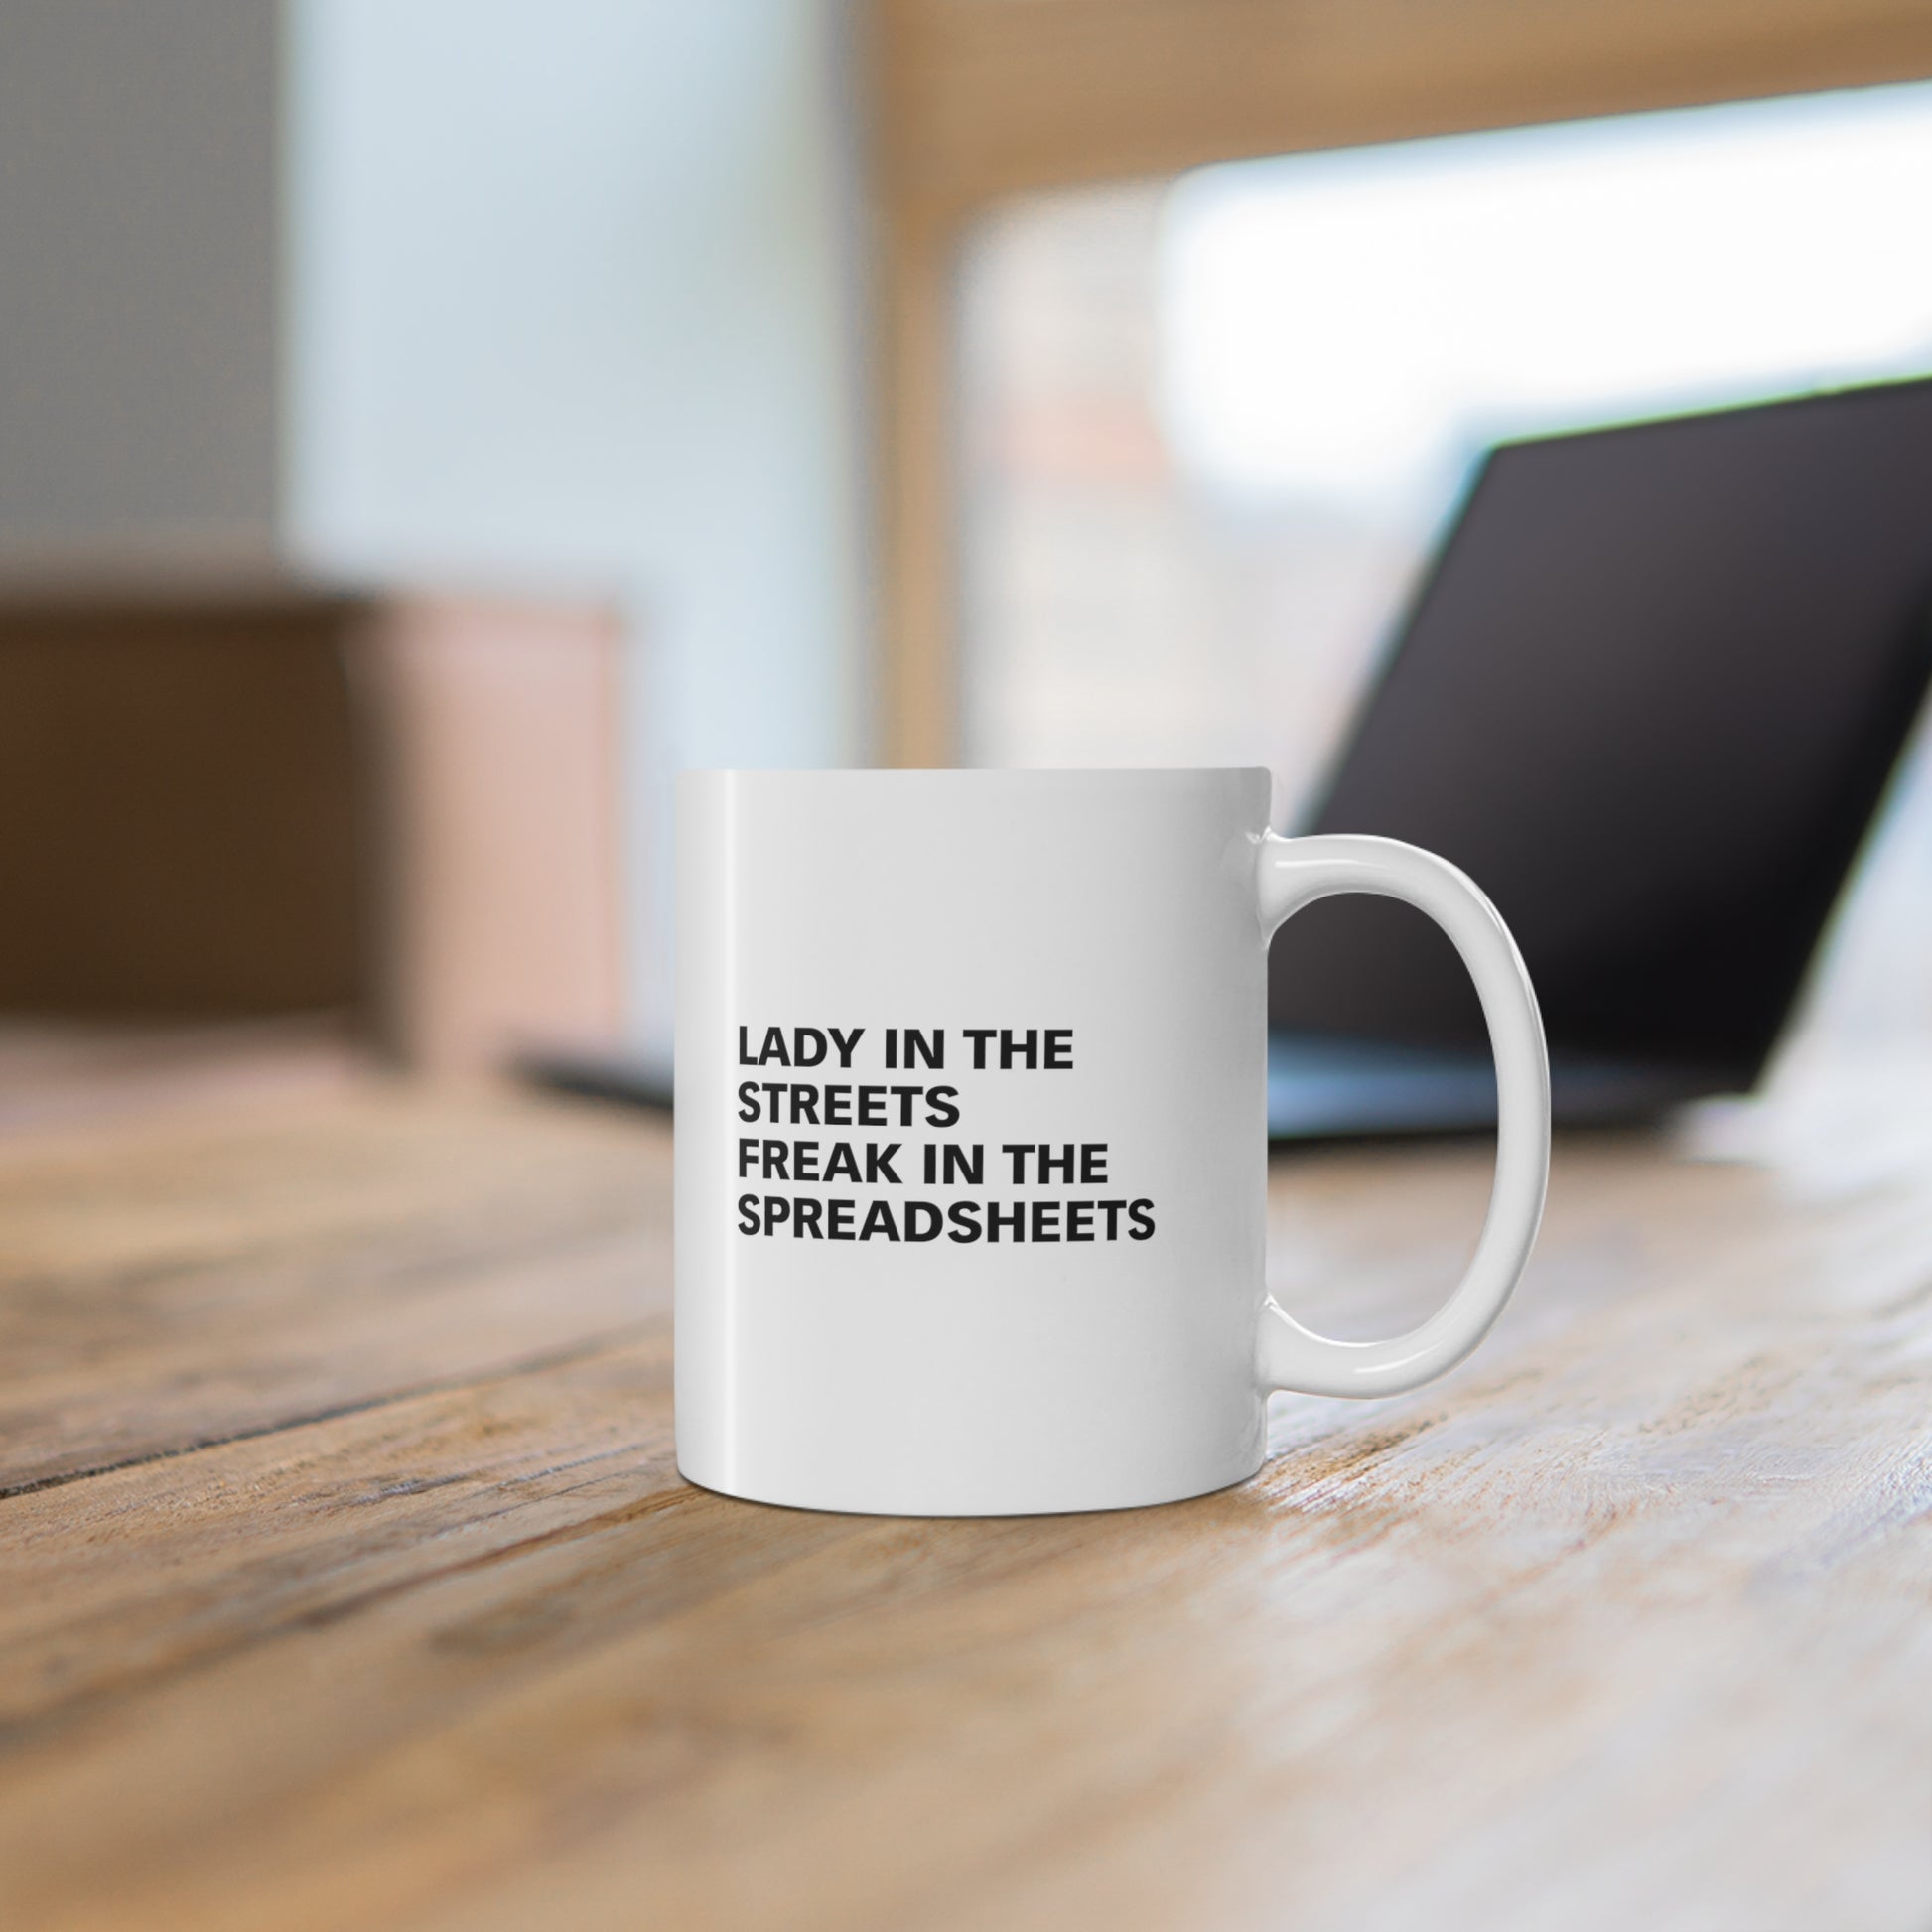 11oz ceramic mug with quote Lady In The Streets Freak In The Spreadsheets